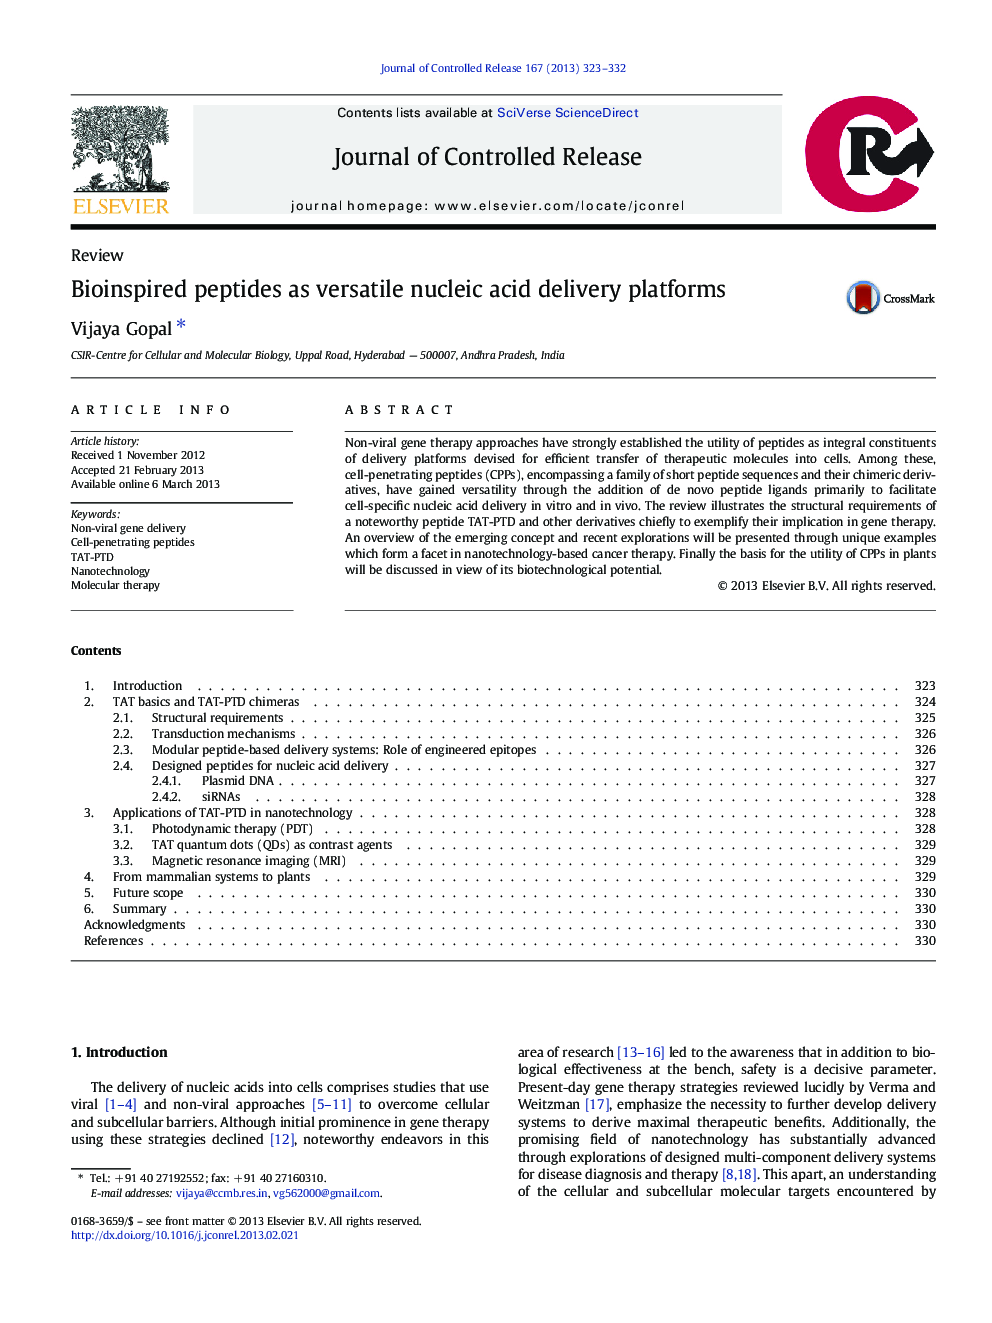 Bioinspired peptides as versatile nucleic acid delivery platforms